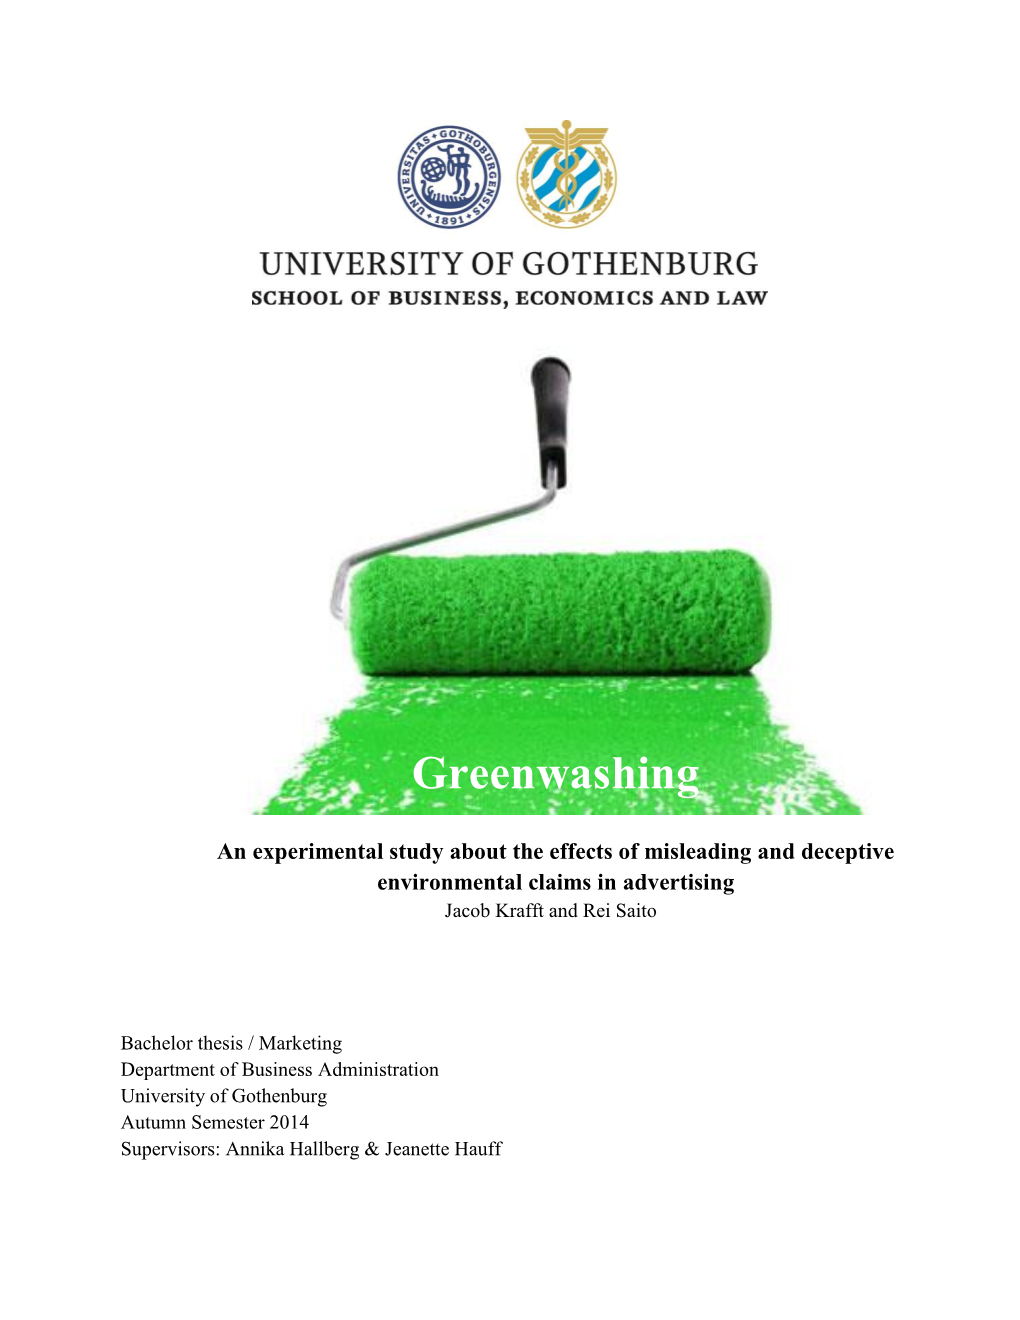 An Experimental Study About the Effects of Greenwashing In